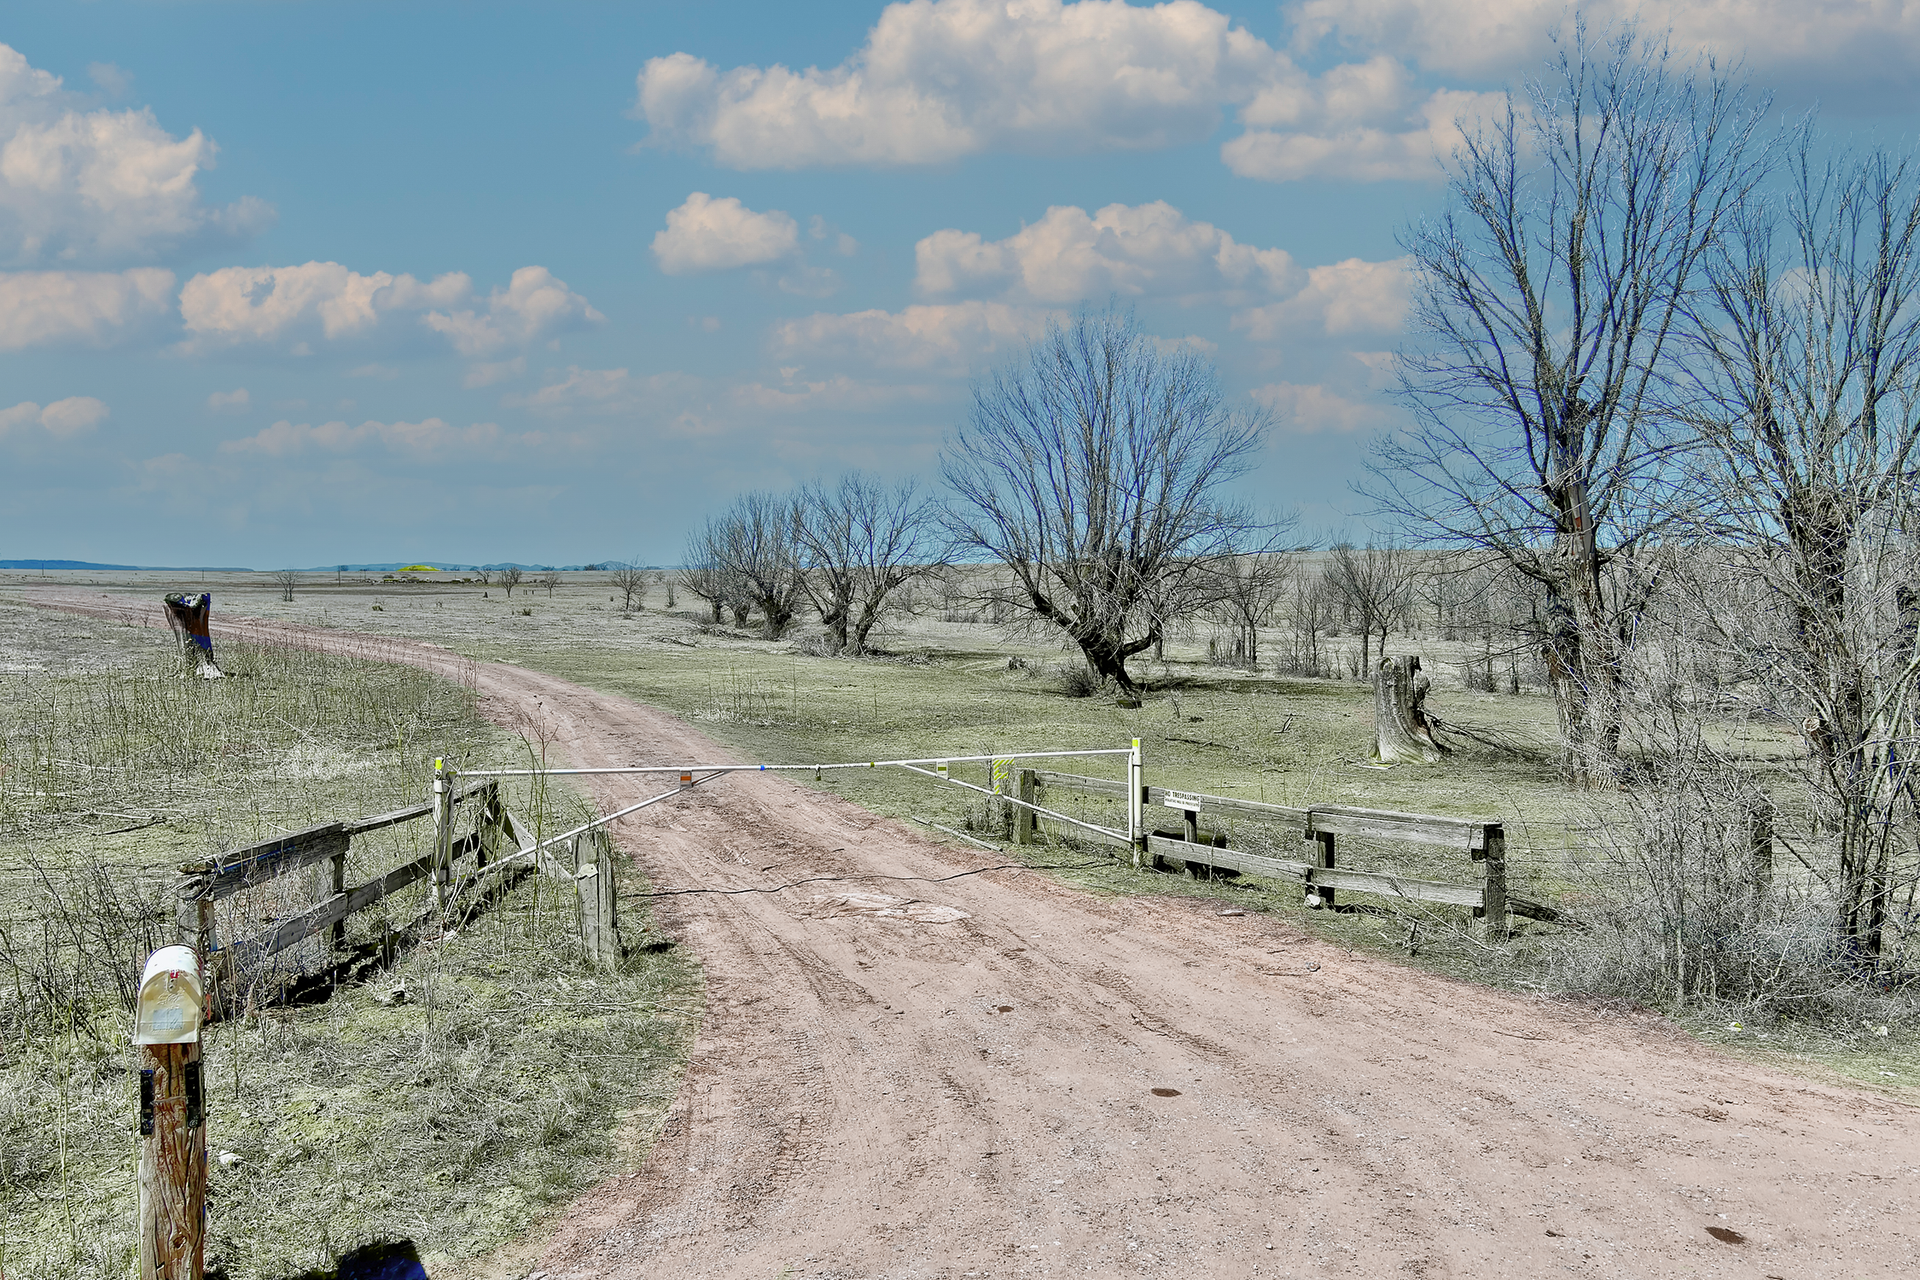 A dirt road going through a grassy field with a fence.